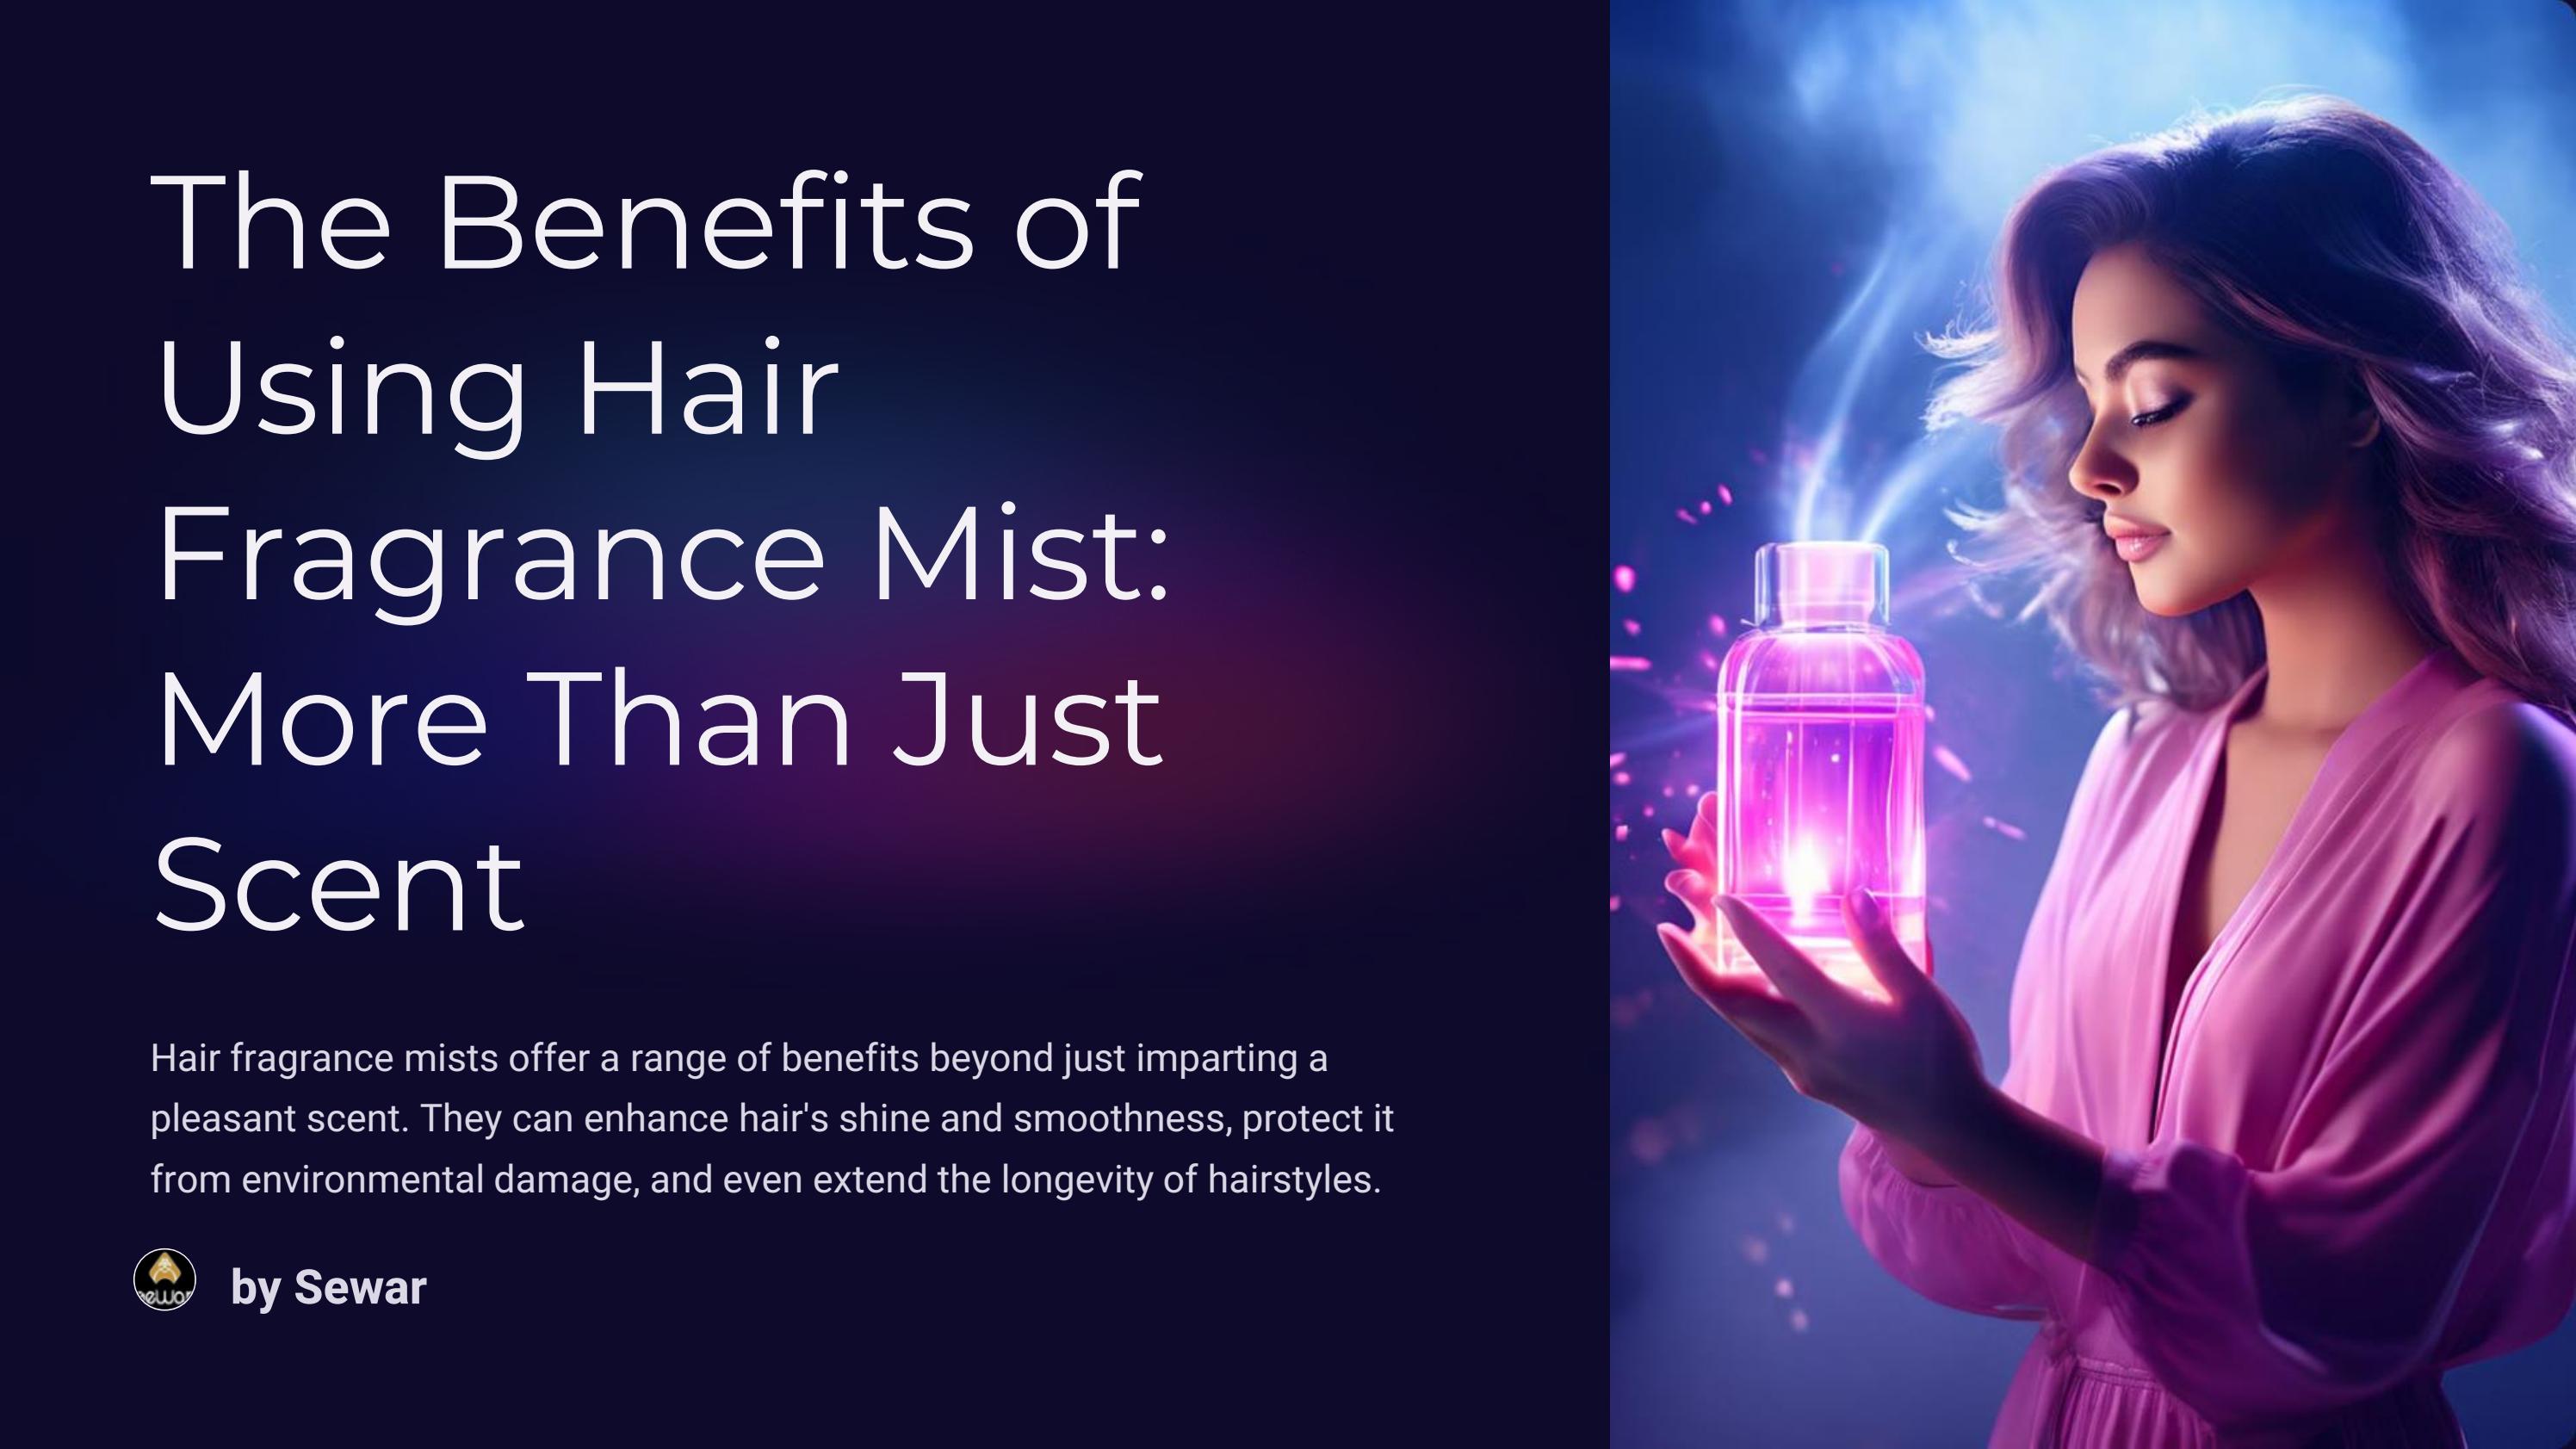 The Benefits of Using Hair Fragrance Mist: More Than Just Scent